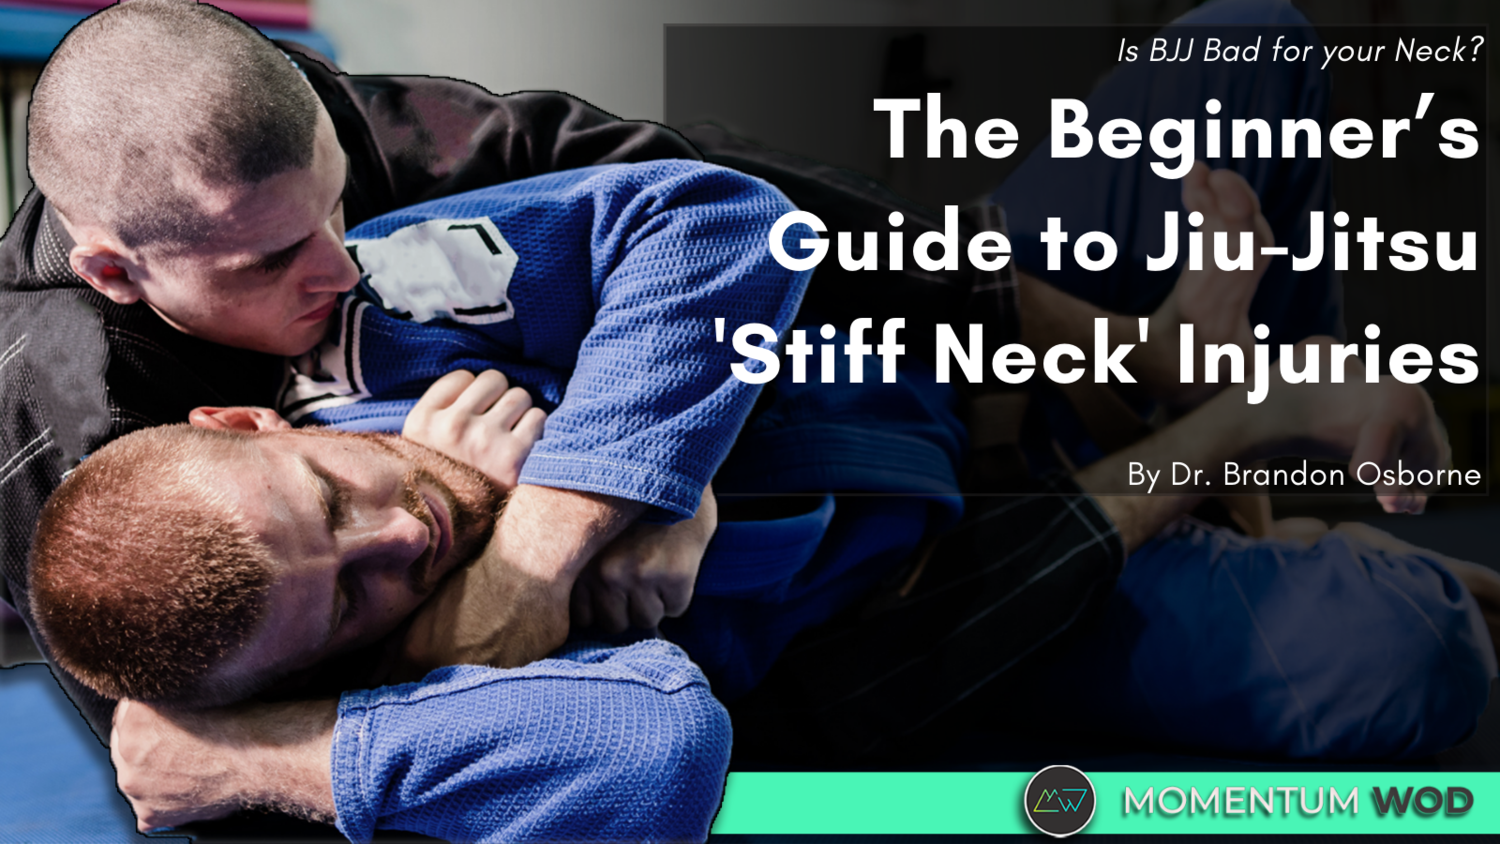 Is BJJ Bad for your Neck? A beginner's Guide to Jiu-Jitsu 